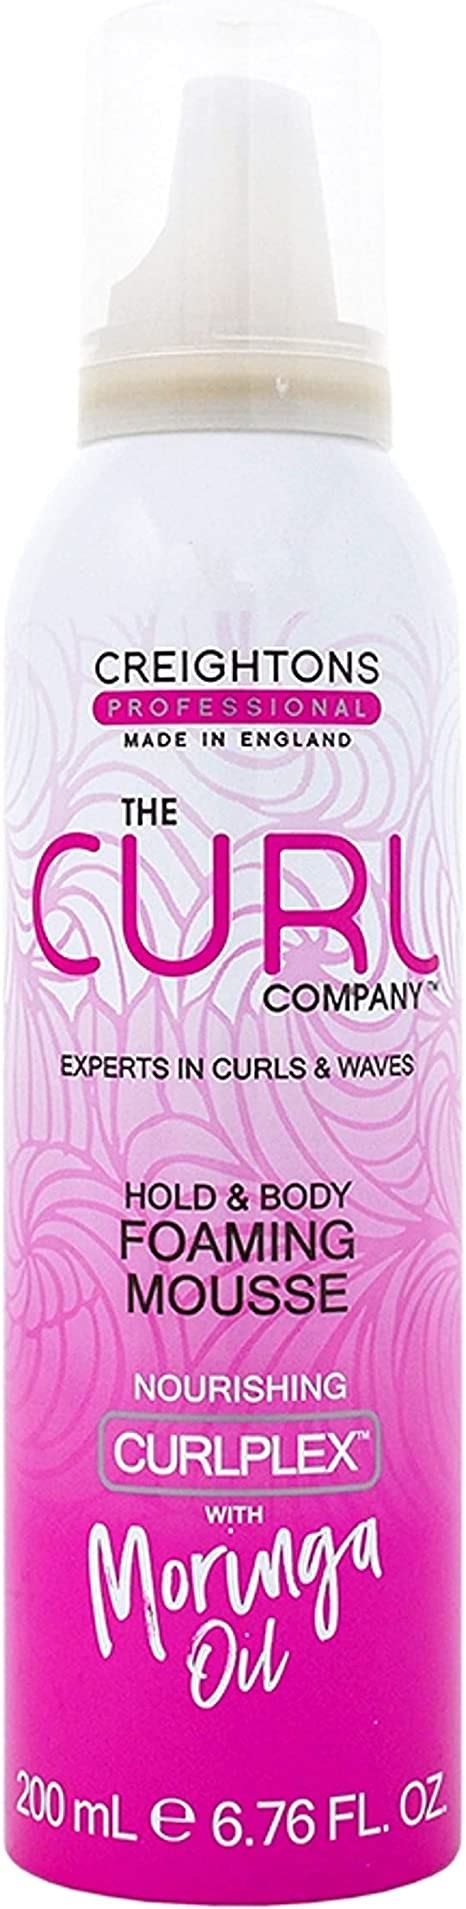 The Curl Company Hold And Body Foaming Mousse 200 Ml Defines Curls